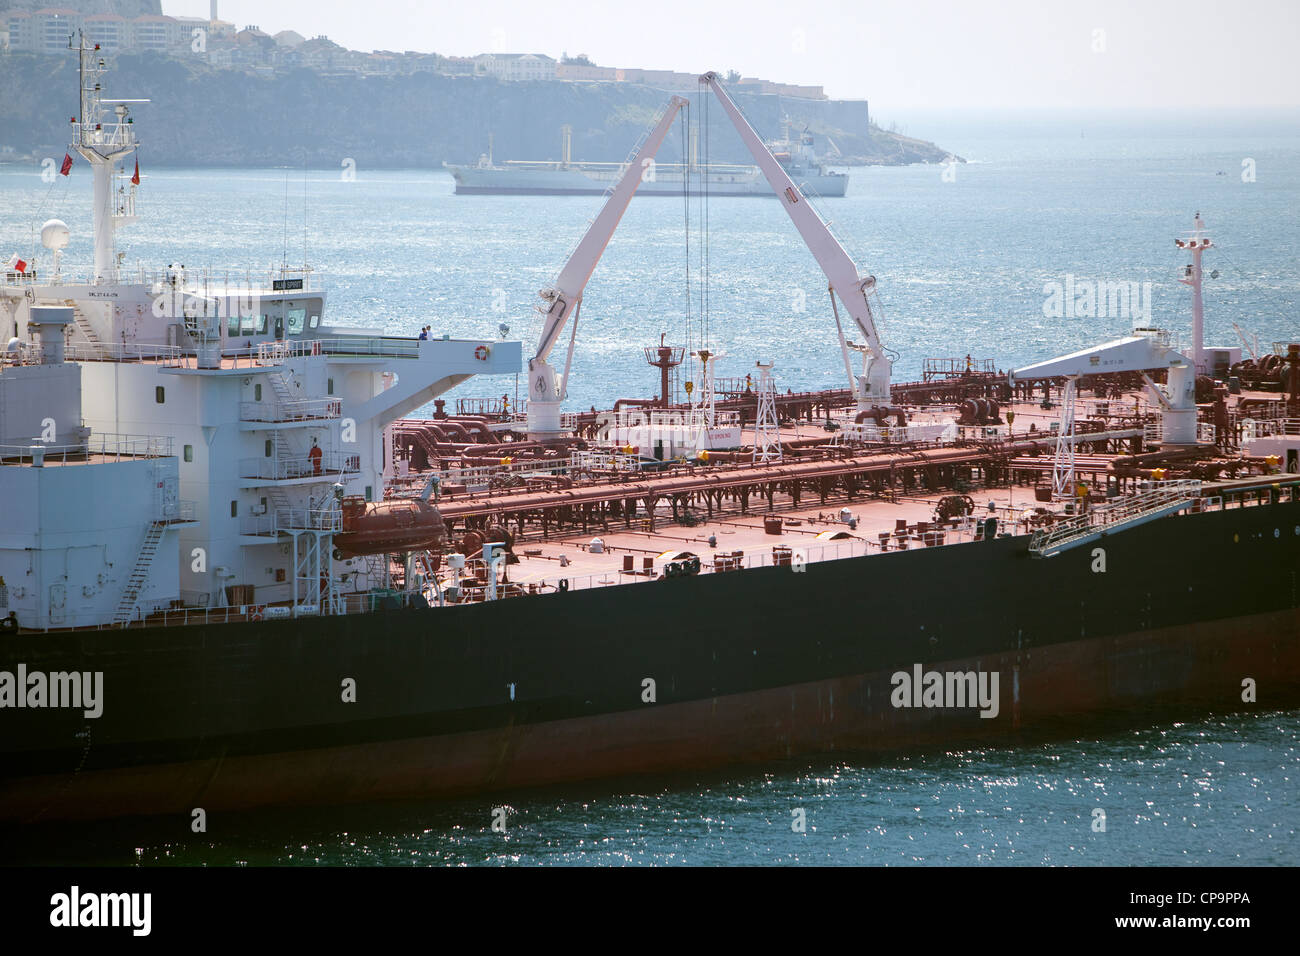 The decks of two Oil tankers alongside side each other doing ship to ship cargo transfer. Stock Photo